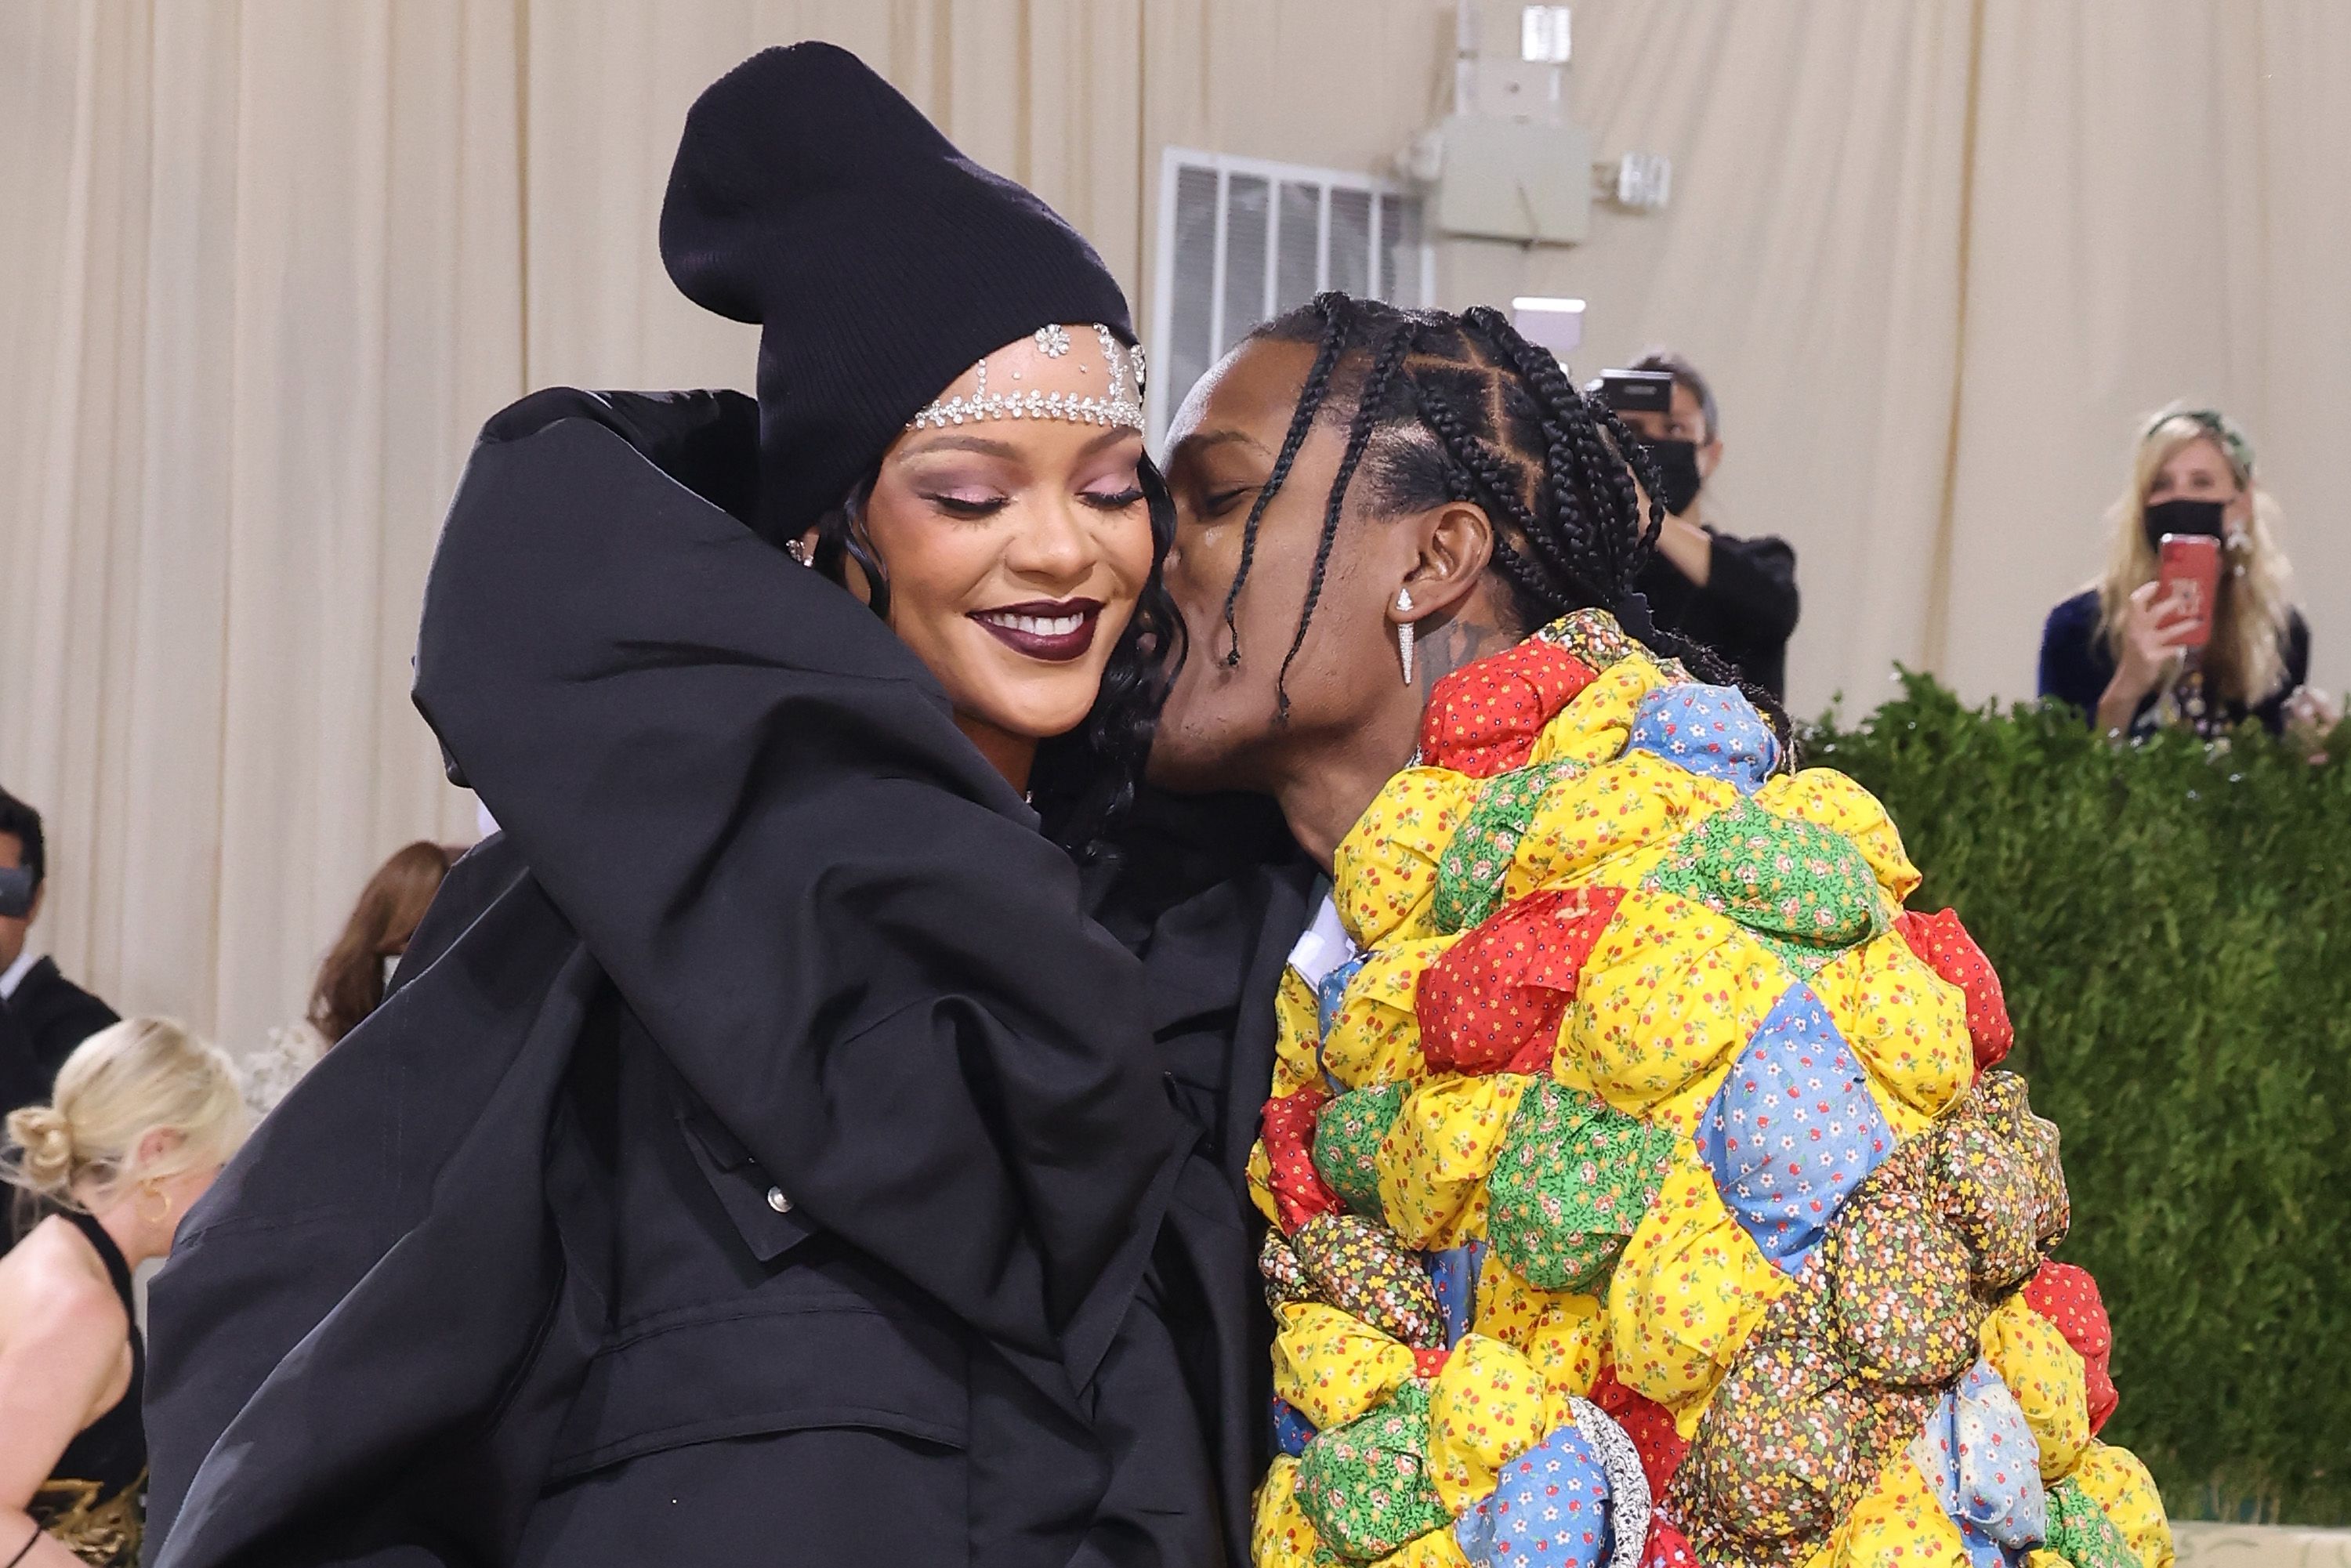 Rihanna And A$AP's Date-Night Style Is Fashion Goals